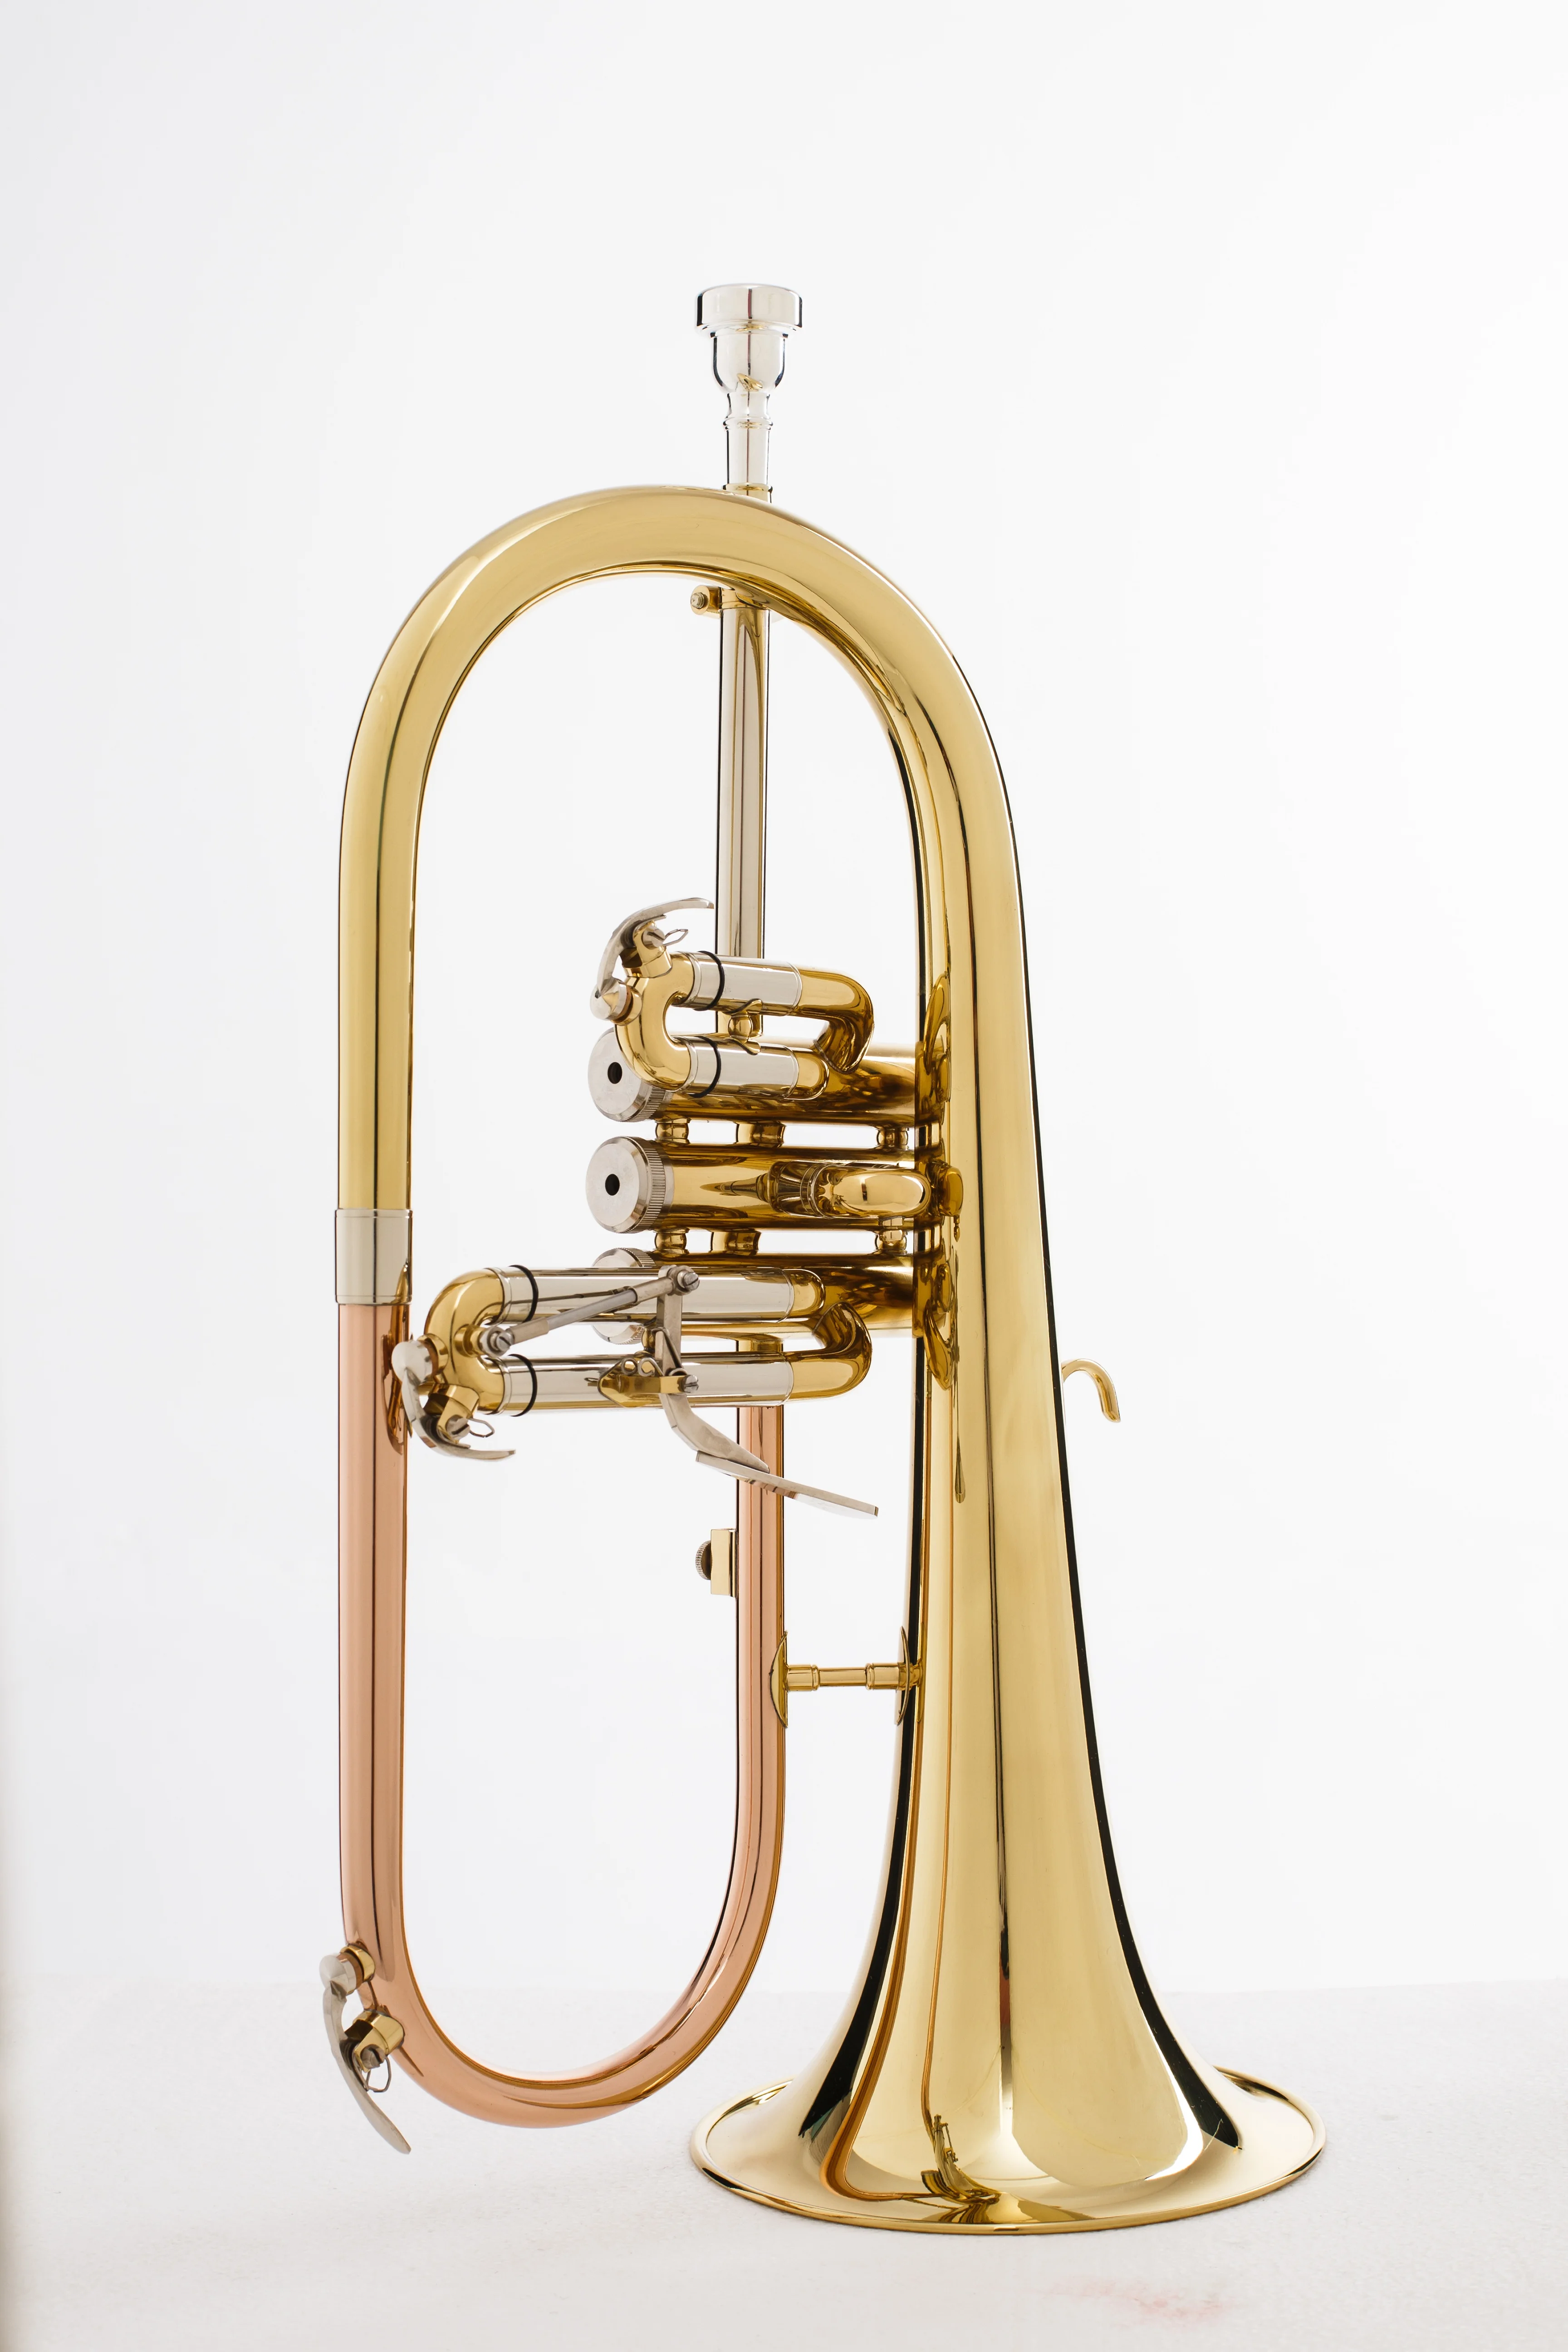 
Hot-selling High-quality Yellow Brass Body Flugel Horn Suitable For Beginners 